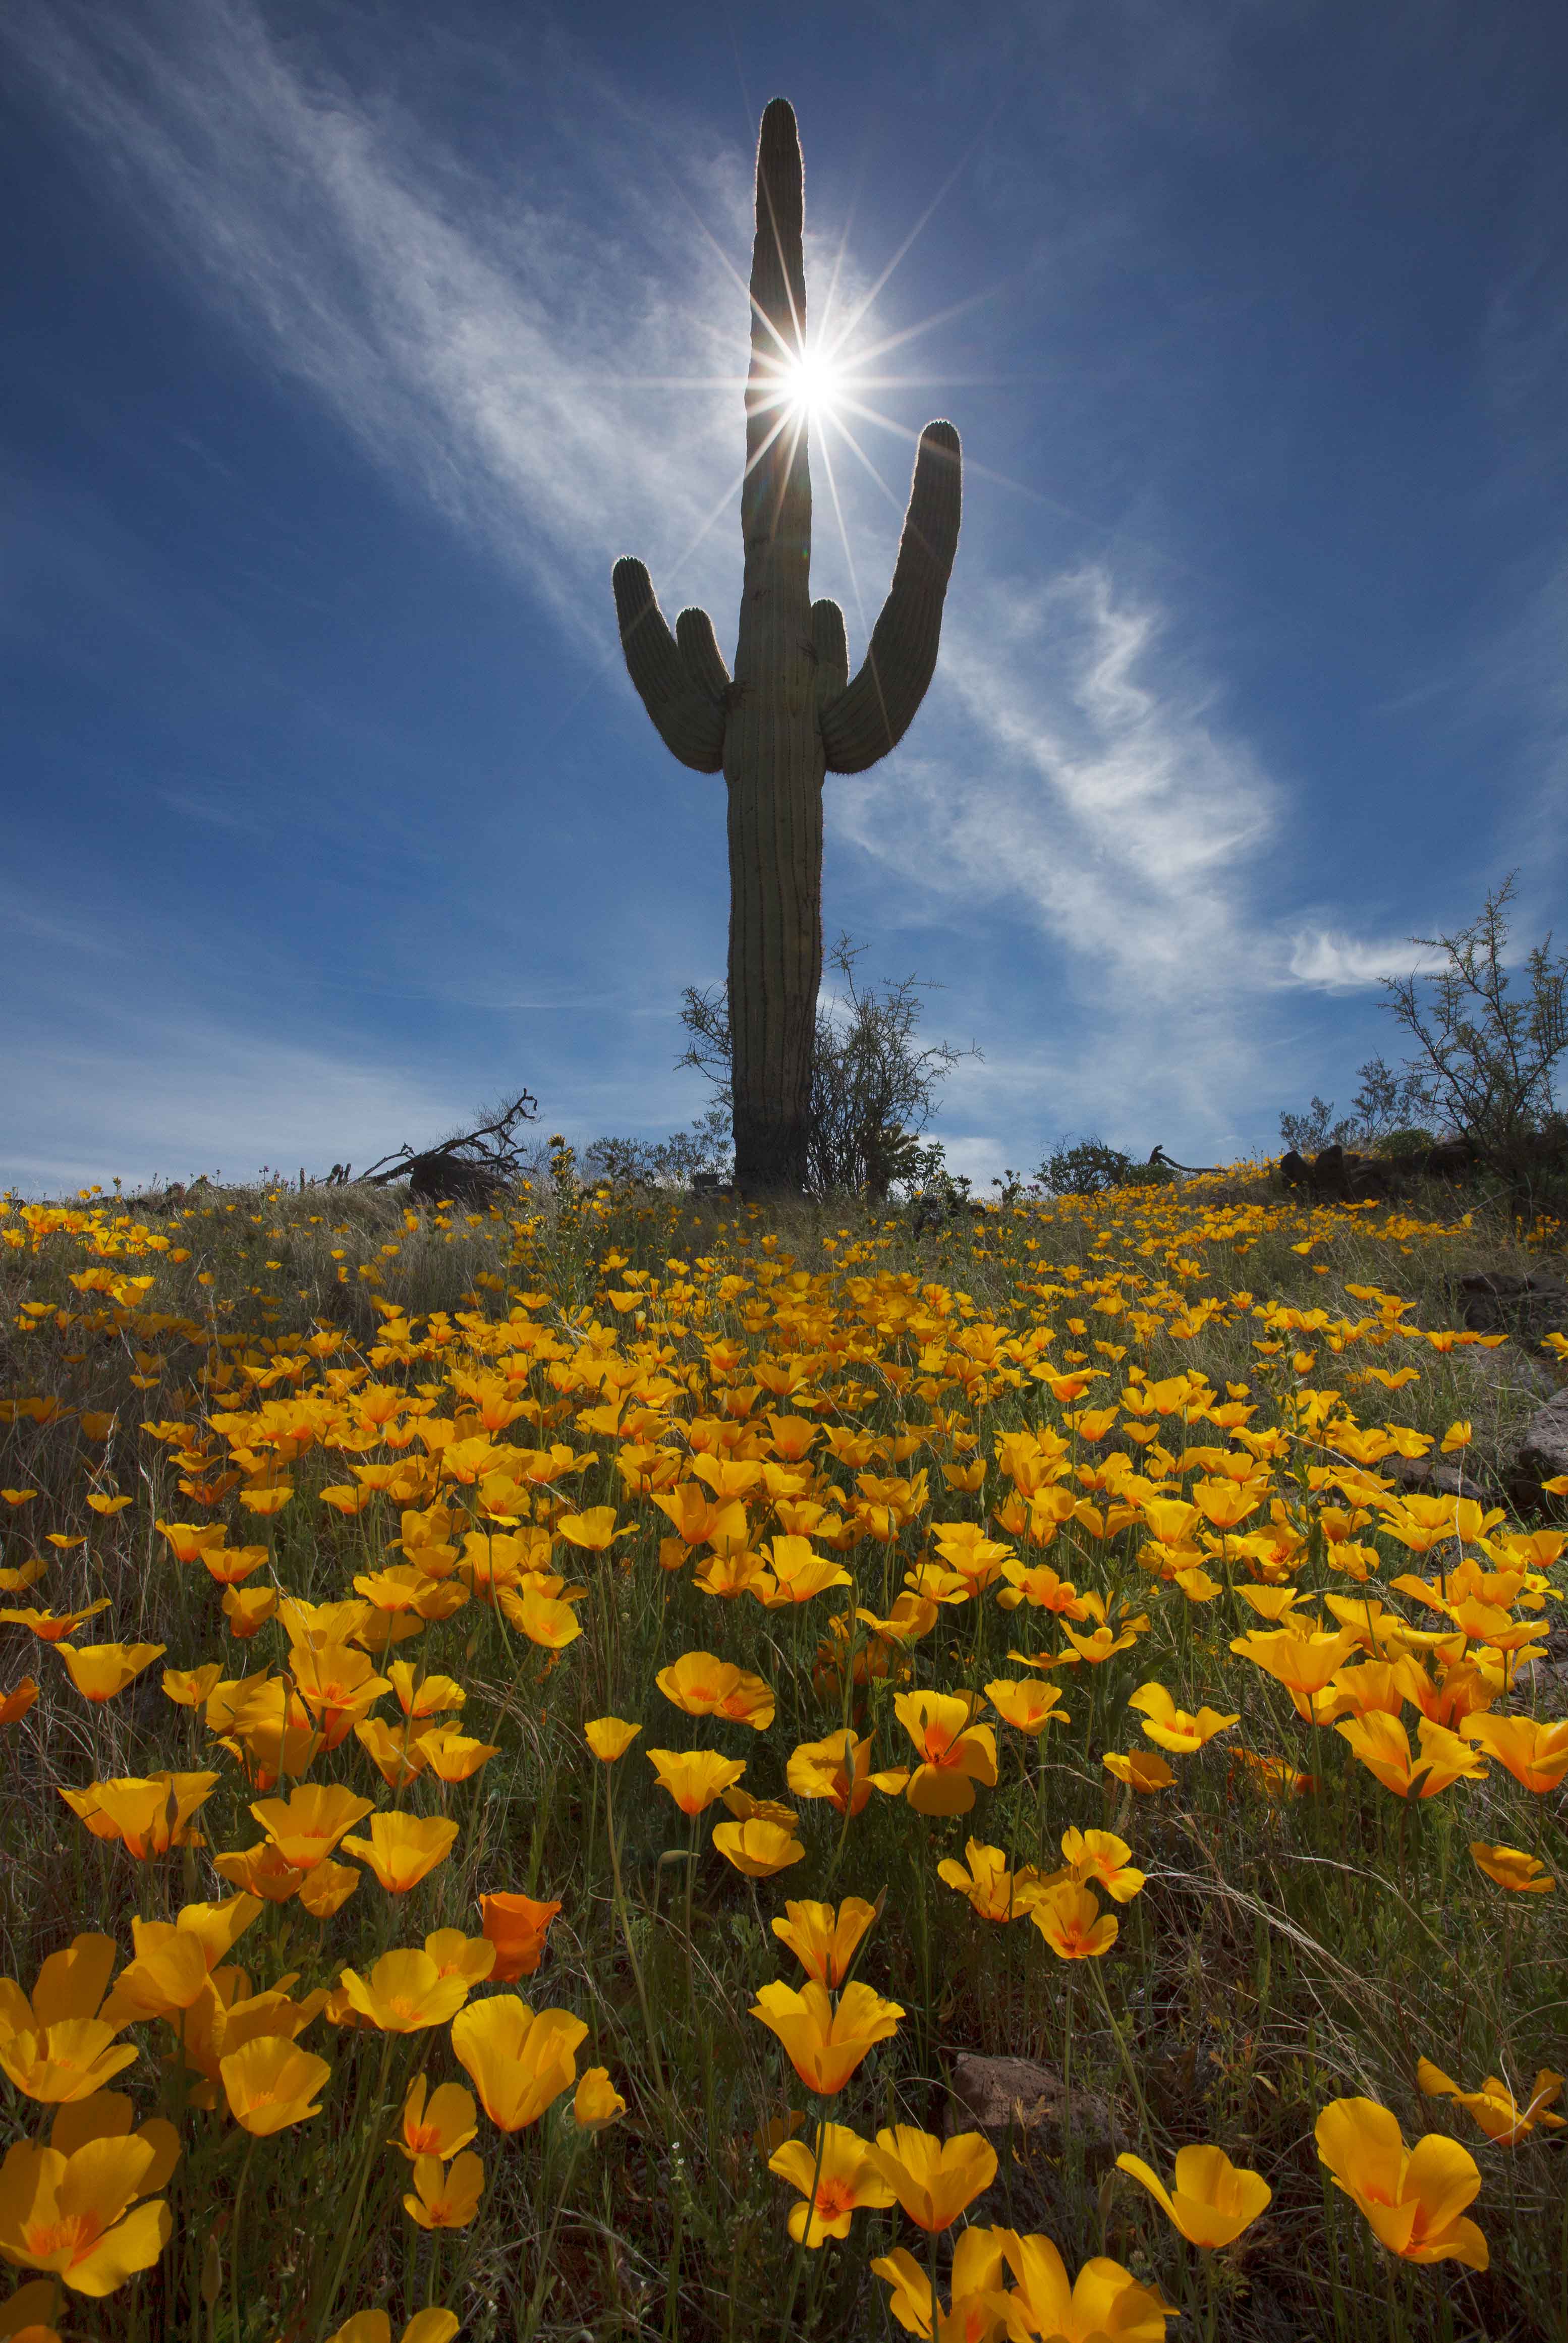 Mexican Goldpoppies and a saguaro in the spring in the Sand Tank Mts., Arizona.